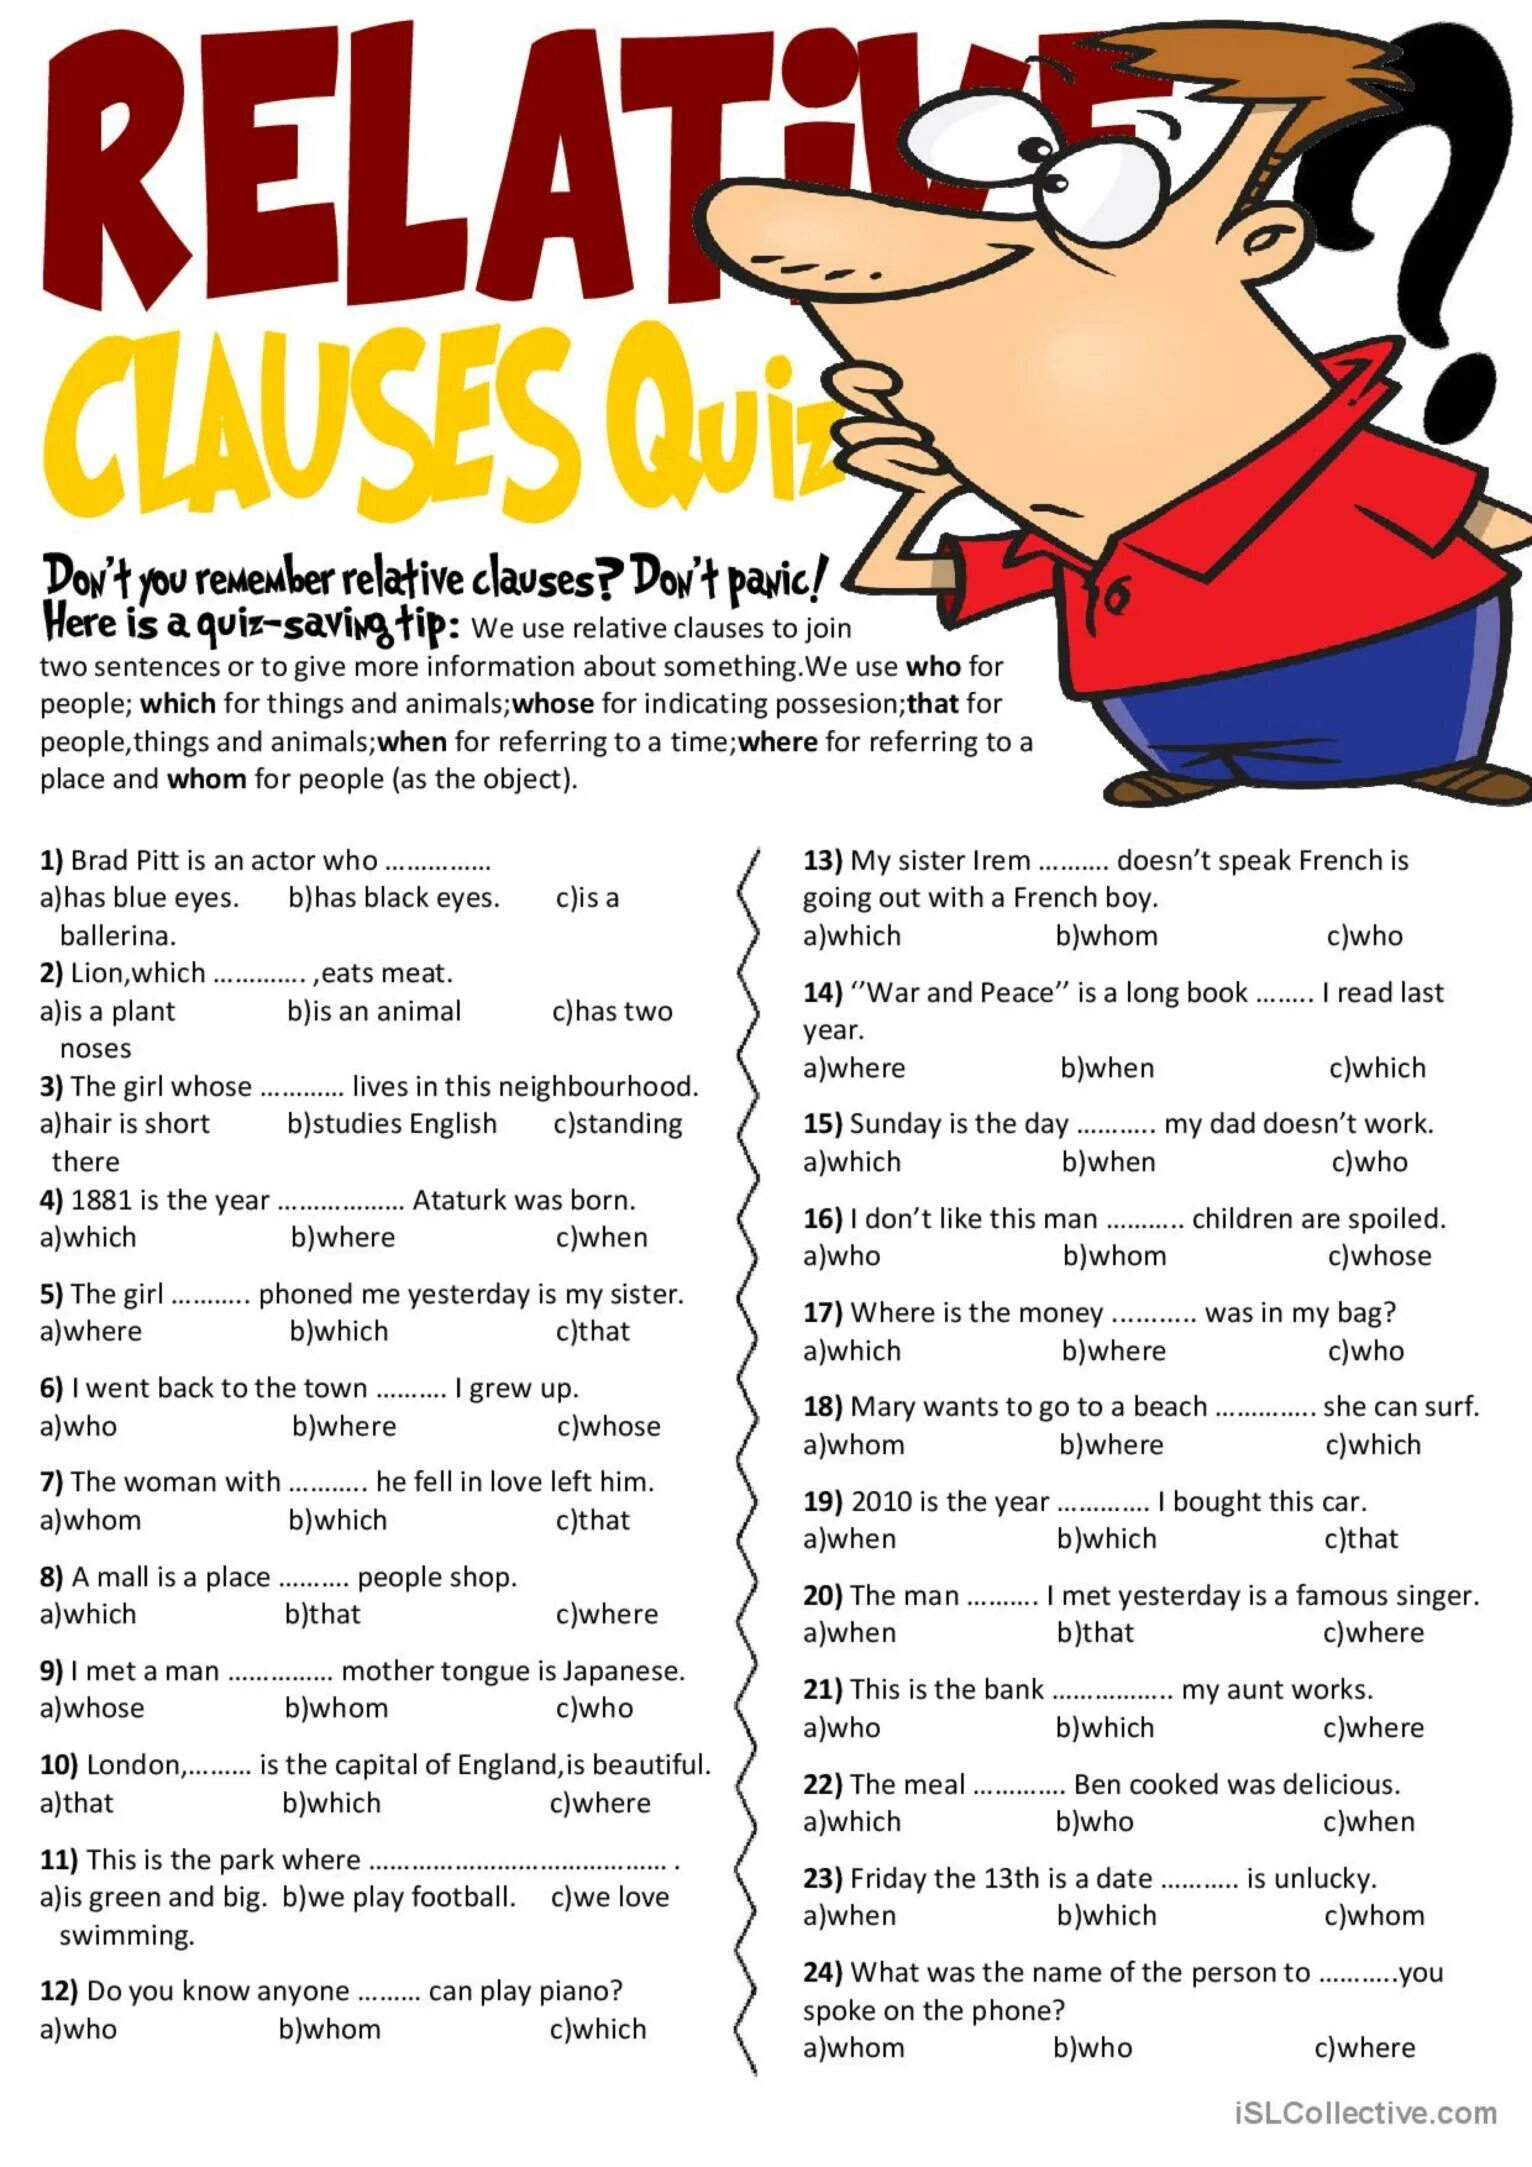 Where can you work. Relative Clauses в английском языке Worksheets. Грамматика relative Clauses. Relative Clauses в английском языке exercises. Relative Clauses в английском упражнения.